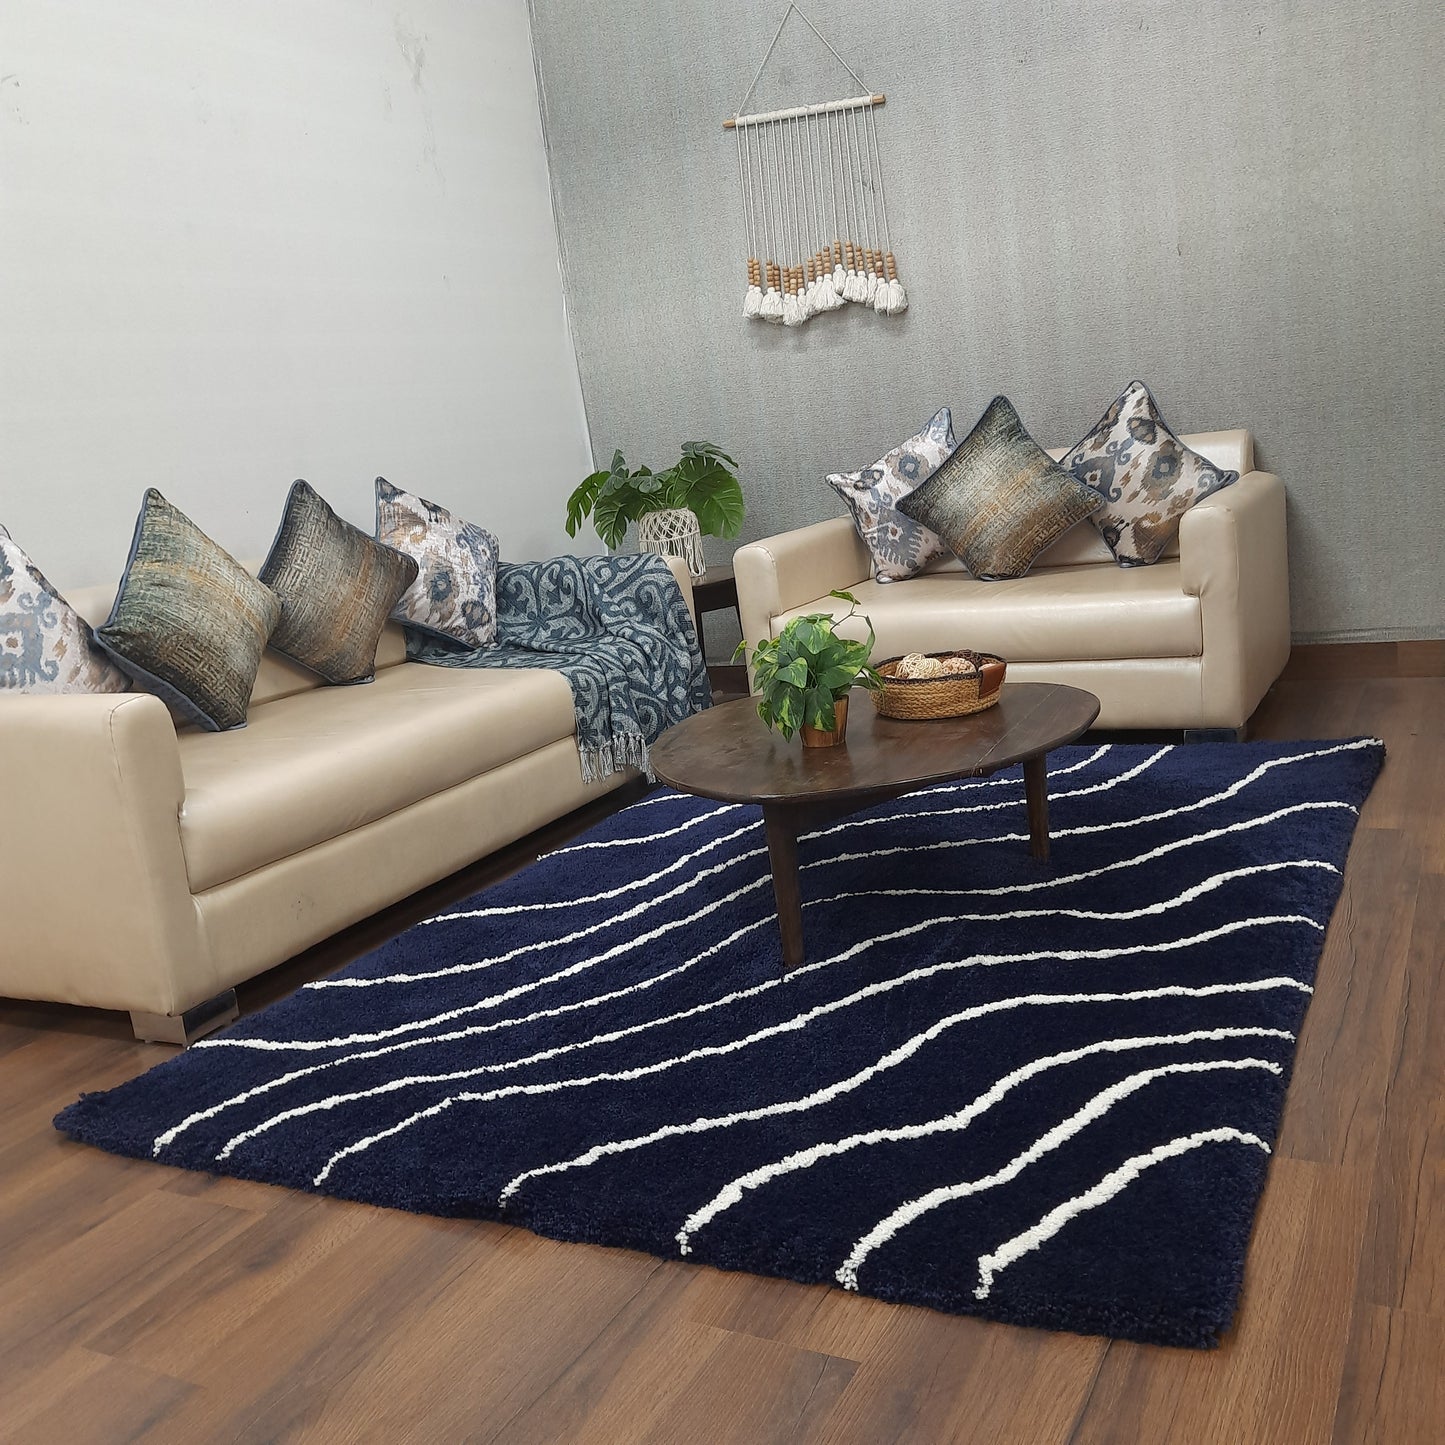 Avioni Home Atlas Collection - Plush Soft Washable Wave Design Carpet In Navy Blue & White| Soft, Carpet Backing, Easy to Clean